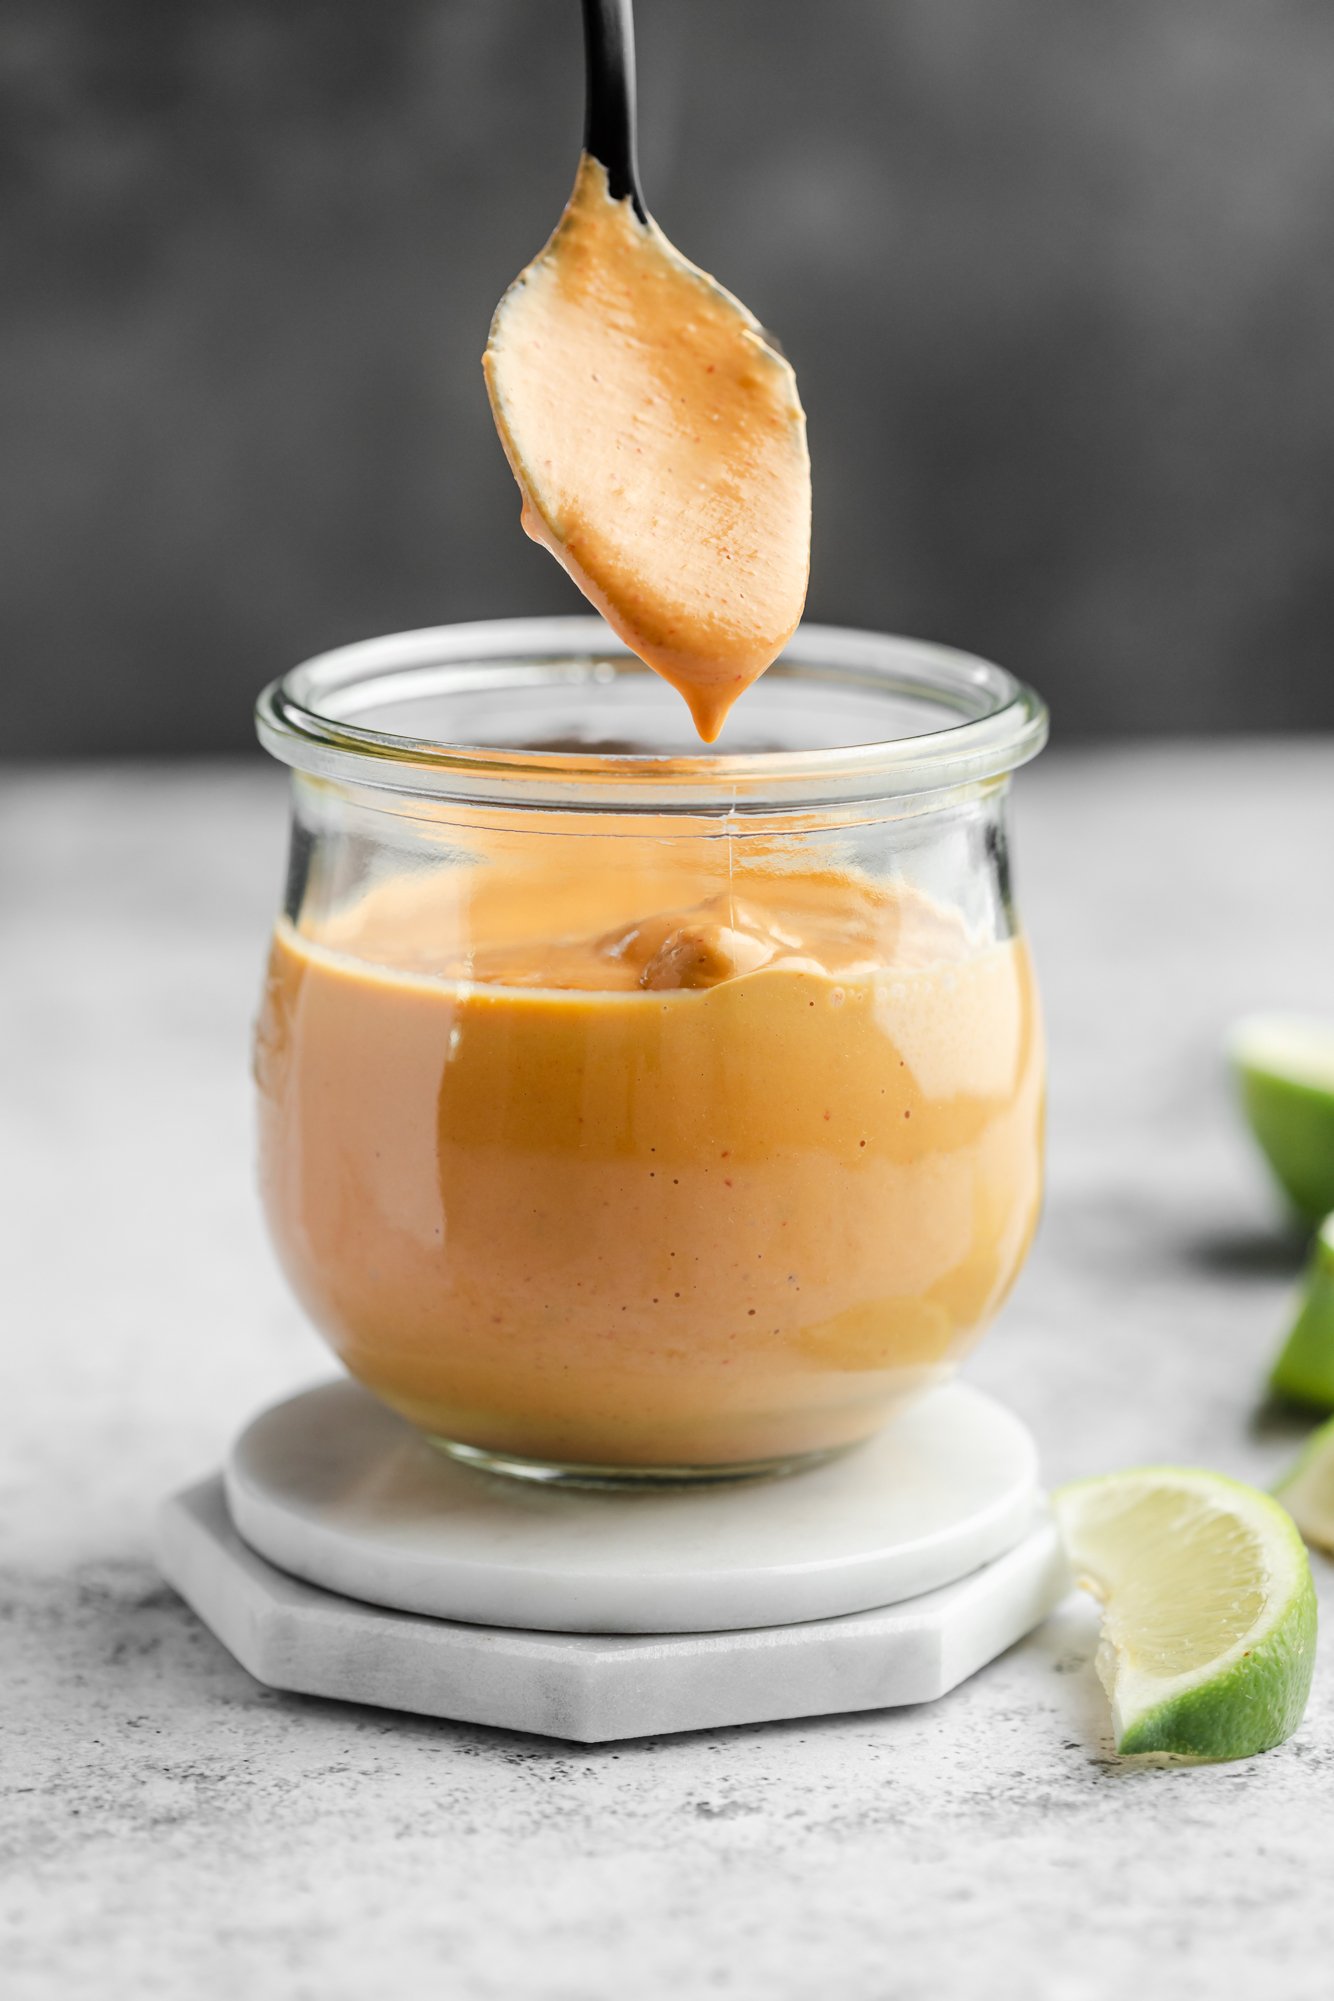 A spoonful rises from a small glass jar of orange chipotle sauce.